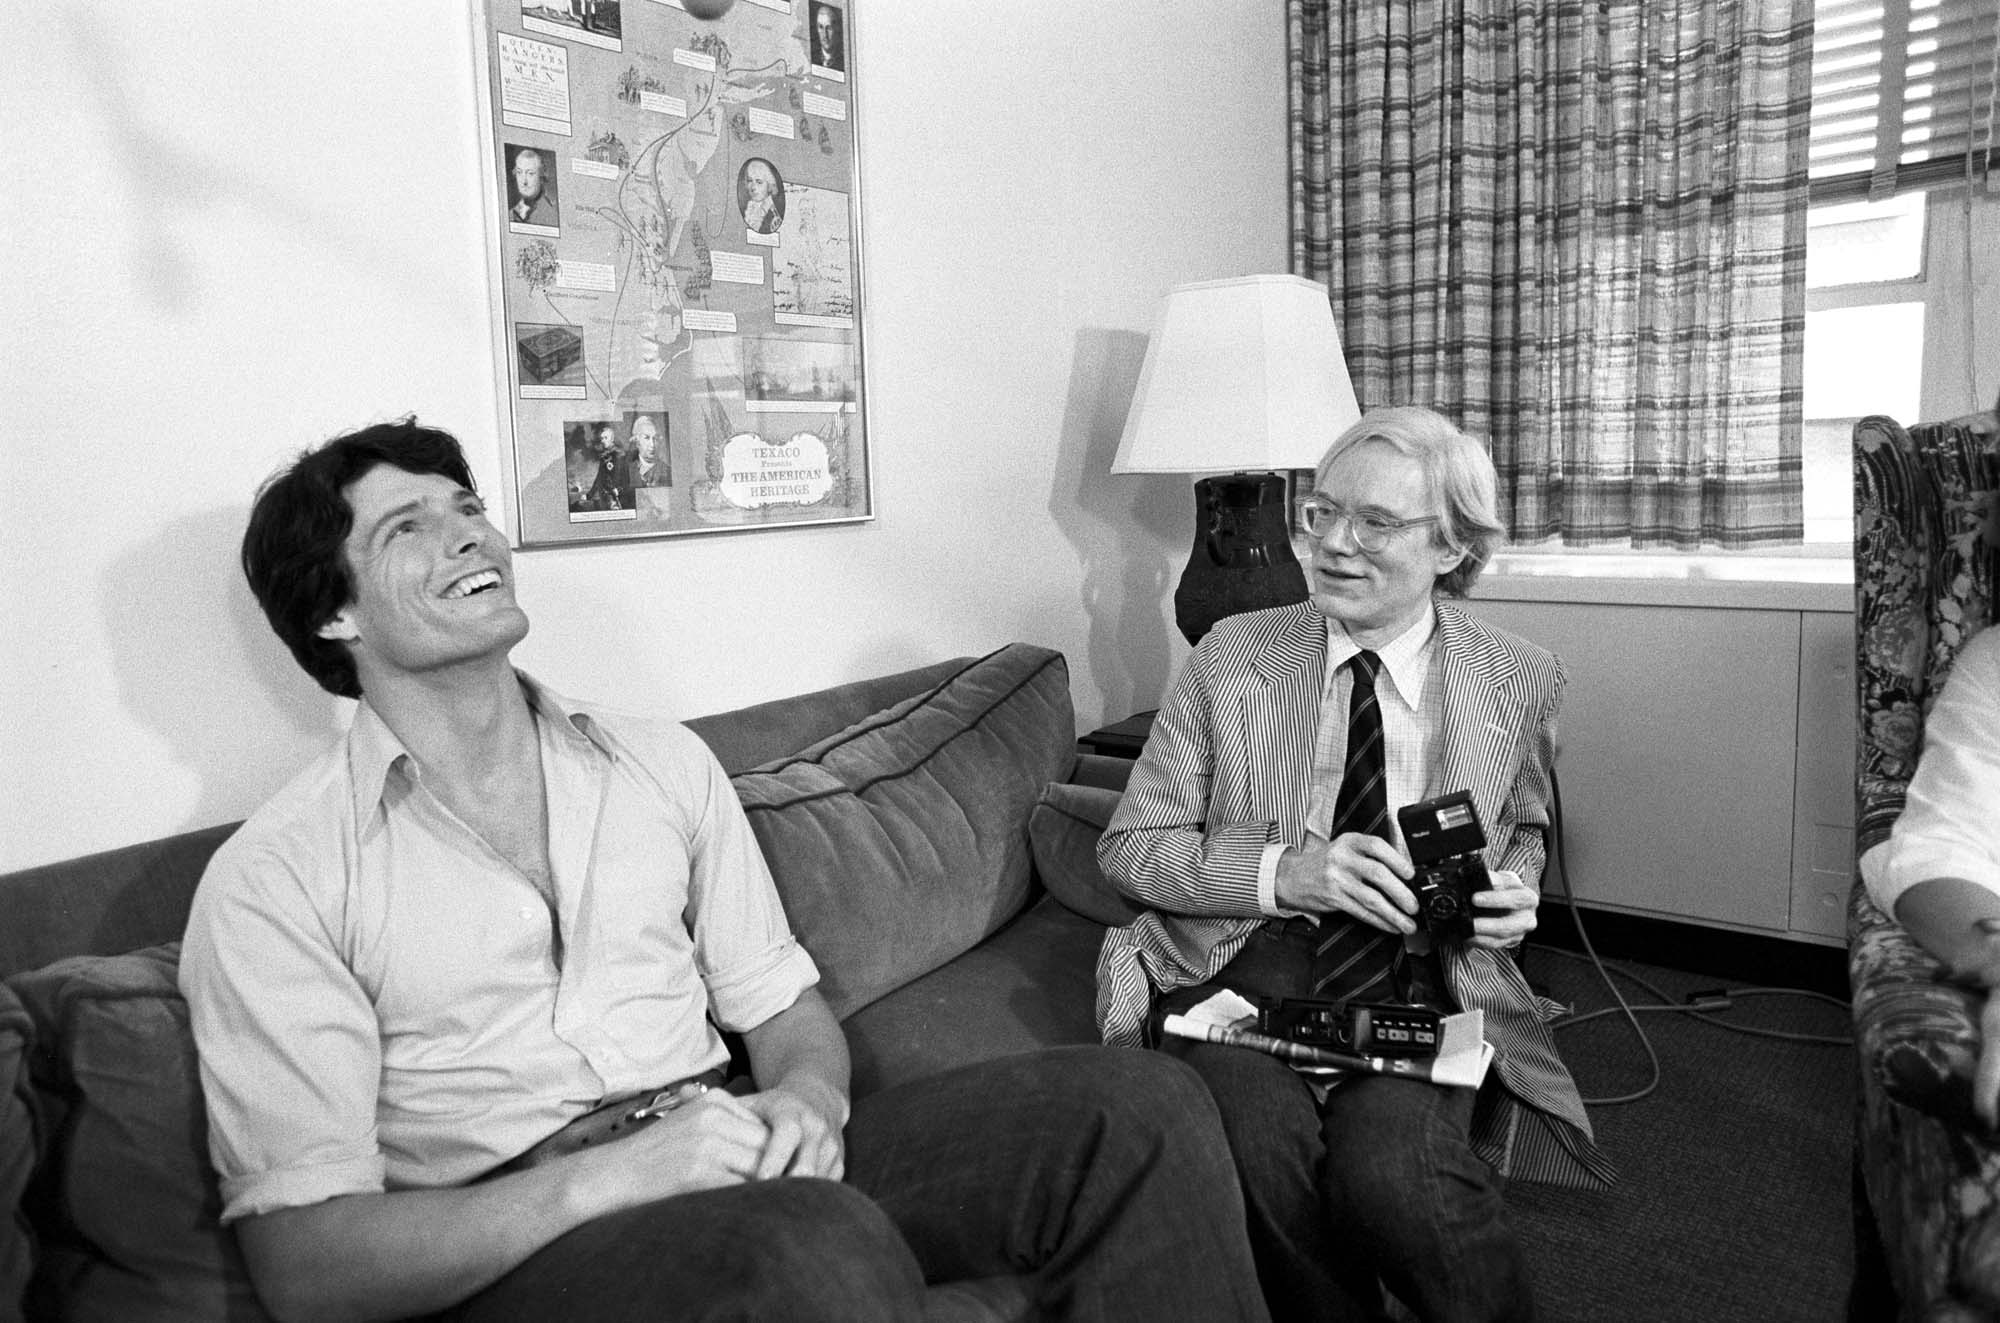 Christopher Makos, born Lowell, Massachusetts, United States 1948, <em>Andy taping Christopher Reeves for ‘Interview’ magazine</em>, 1977, New York, gelatin-silver photograph, 21.2 x 32.2 cm (image), 27.5 x 35.3 cm (sheet); Private collection, © Christopher Makos